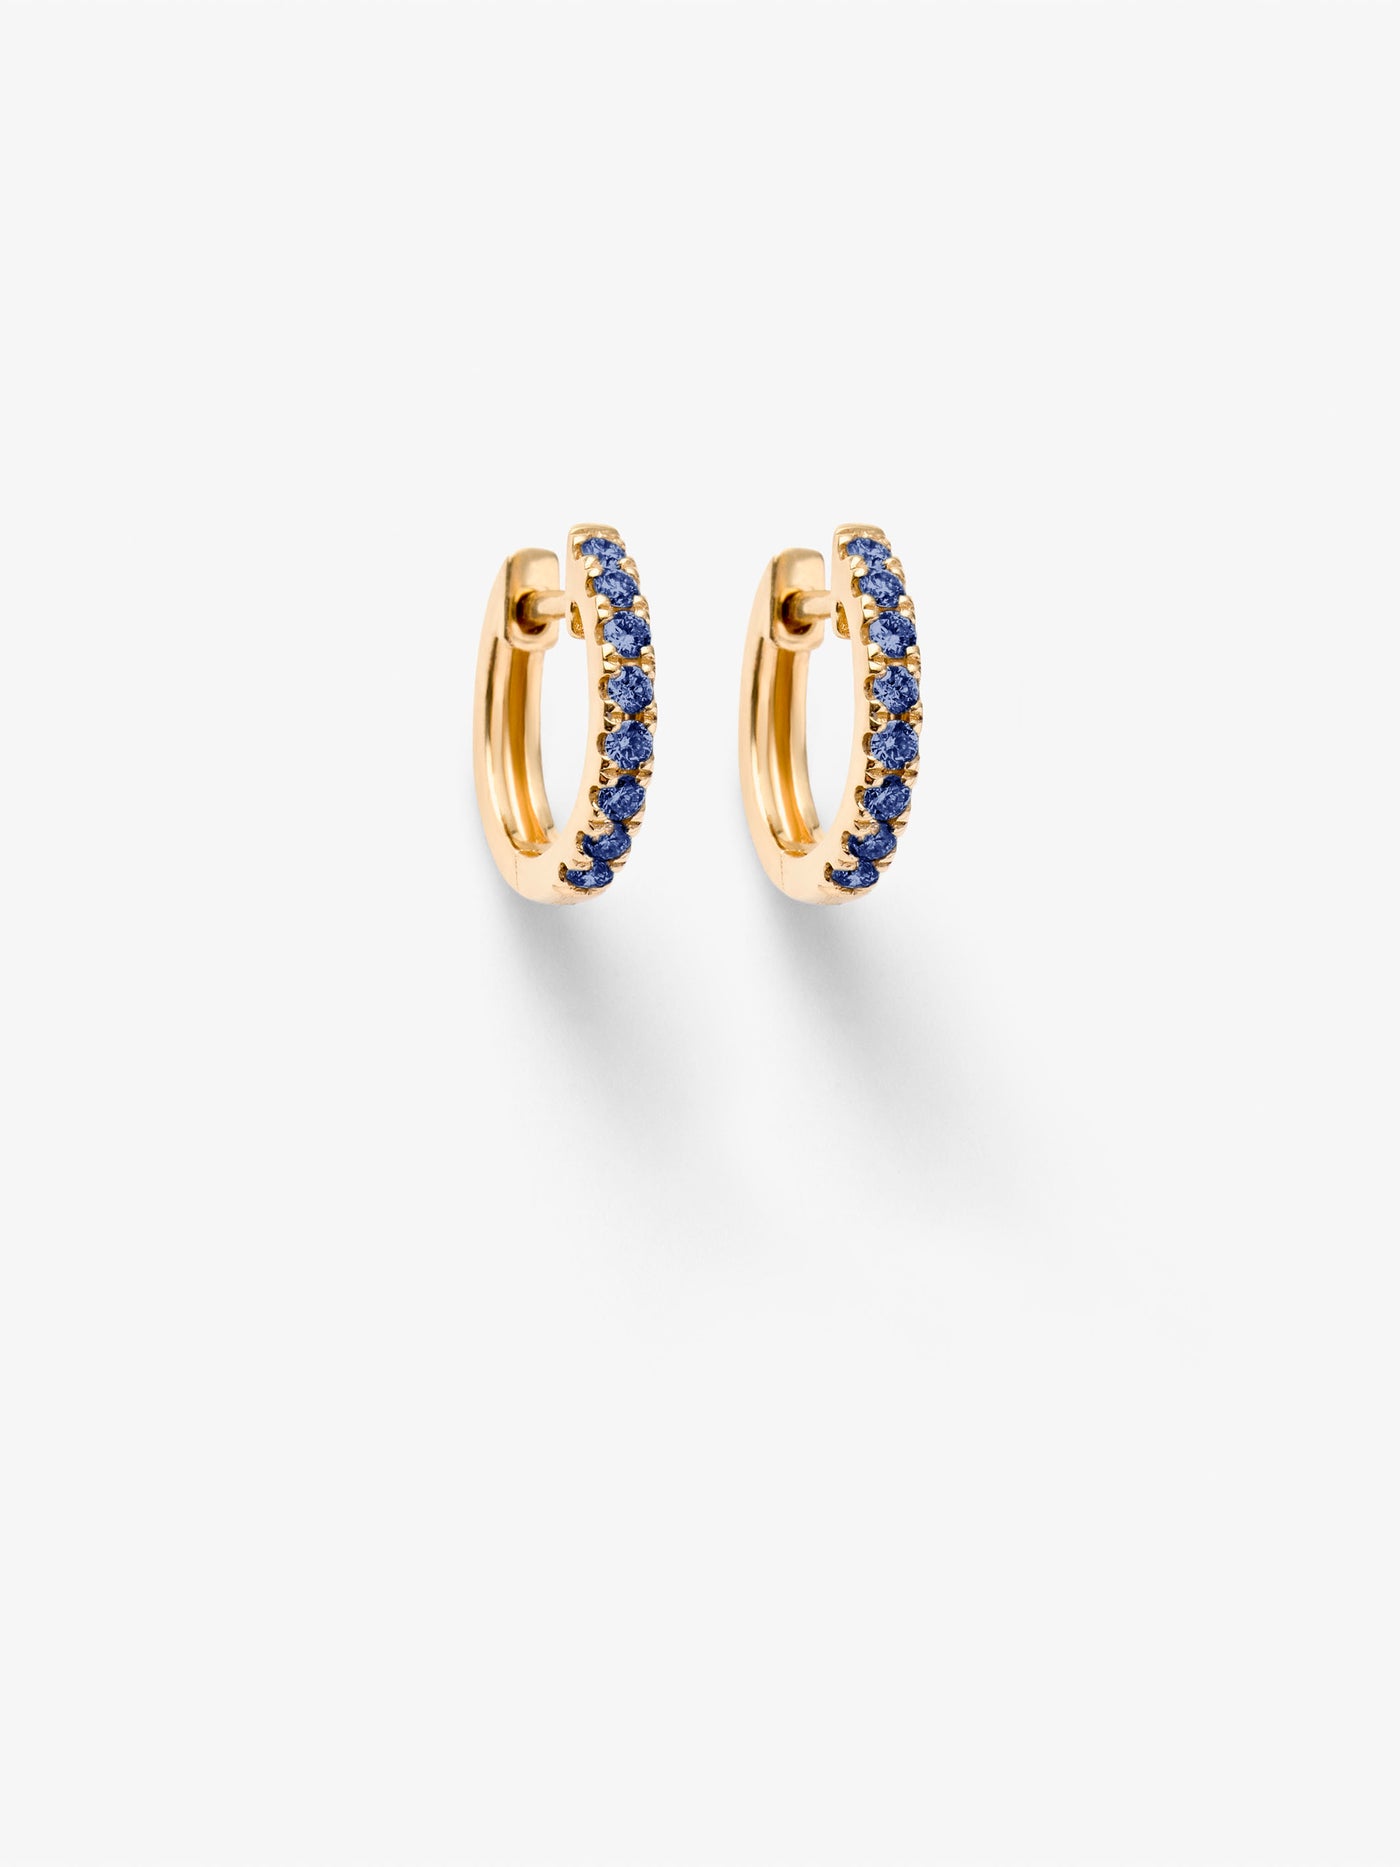 Huggie Earrings in Blue Sapphire and 18k Gold